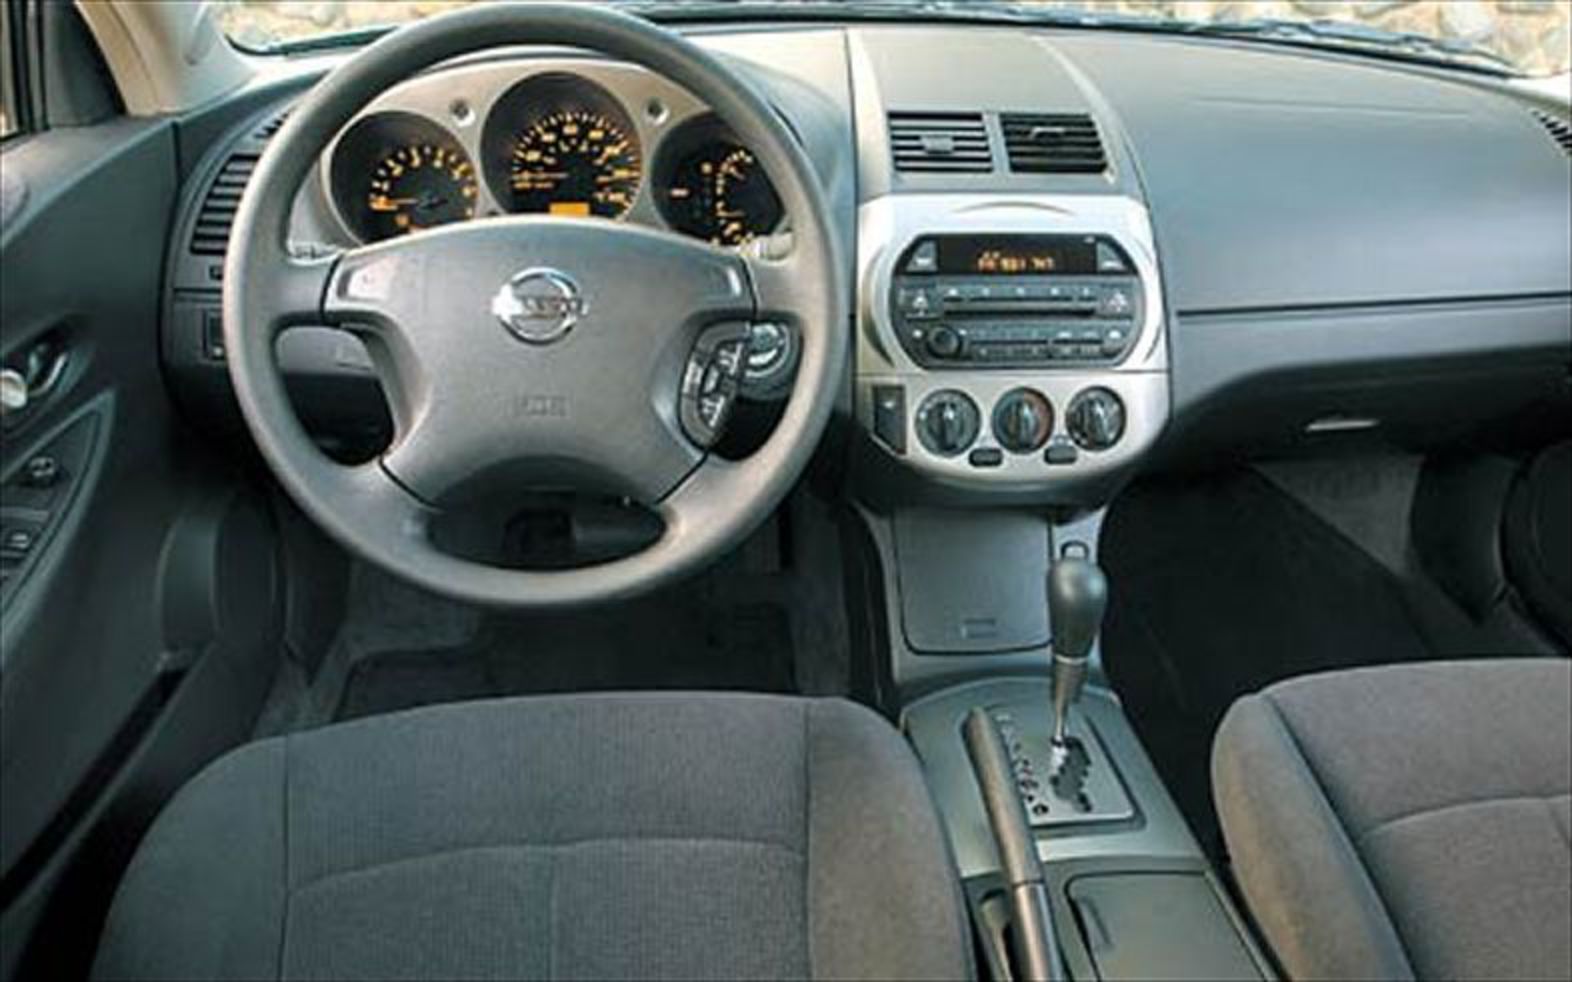 Nissan Altima 25S â€” a model manufactured by Nissan.